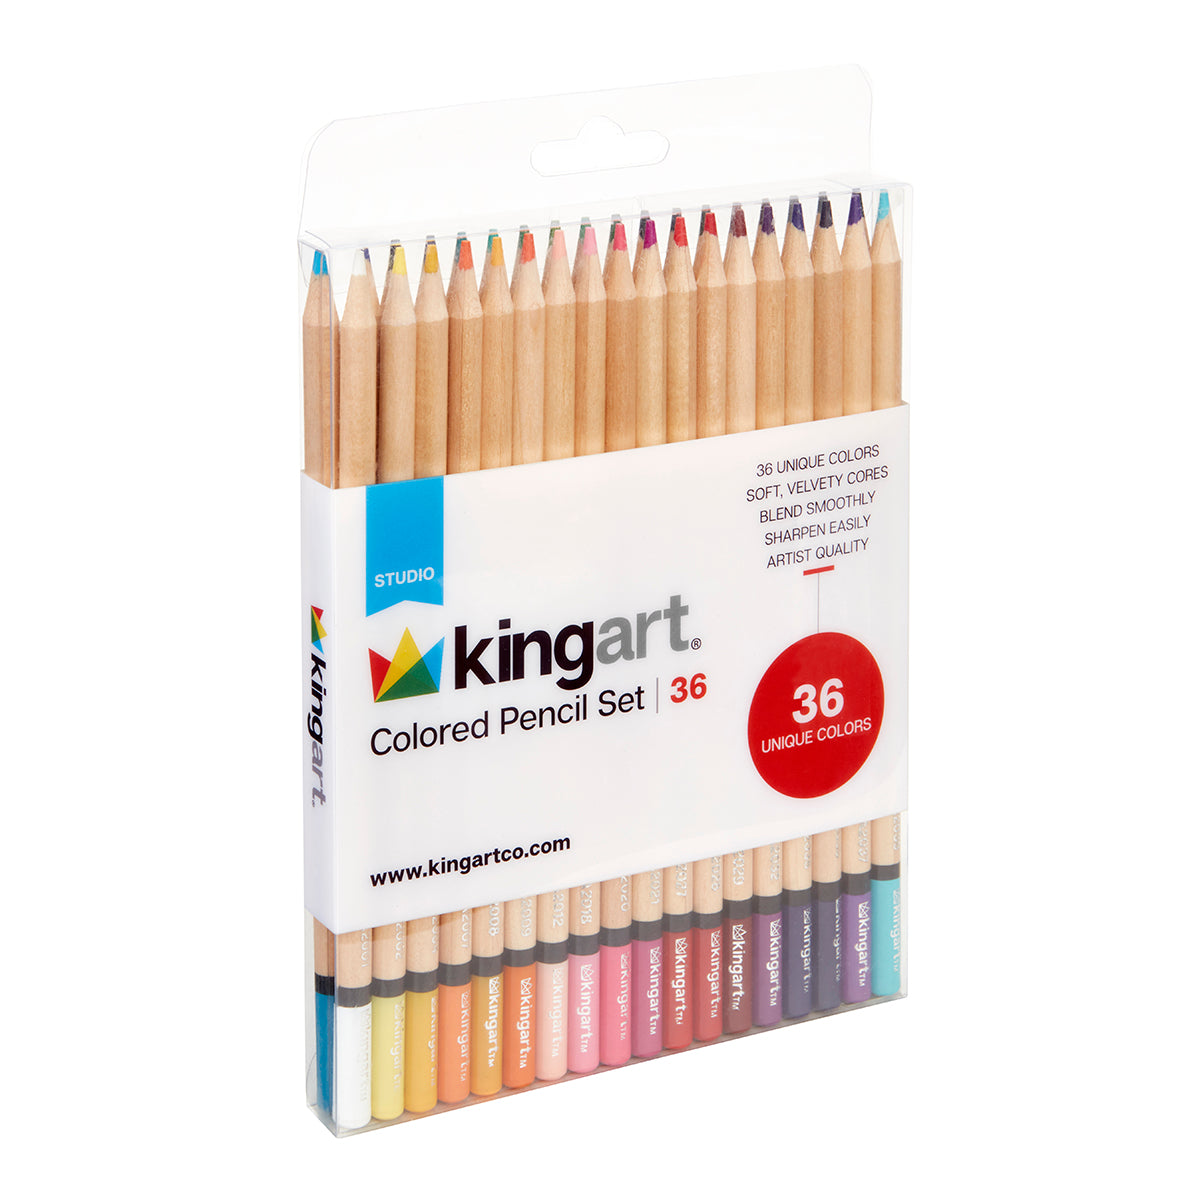  Bundle of Arrtx Professional 126 Colors Colored Pencils with  MeiLiang Watercolor Paint Set, 36 Vivid Colors Perfect for Students, Kids,  Beginners and More : Arts, Crafts & Sewing